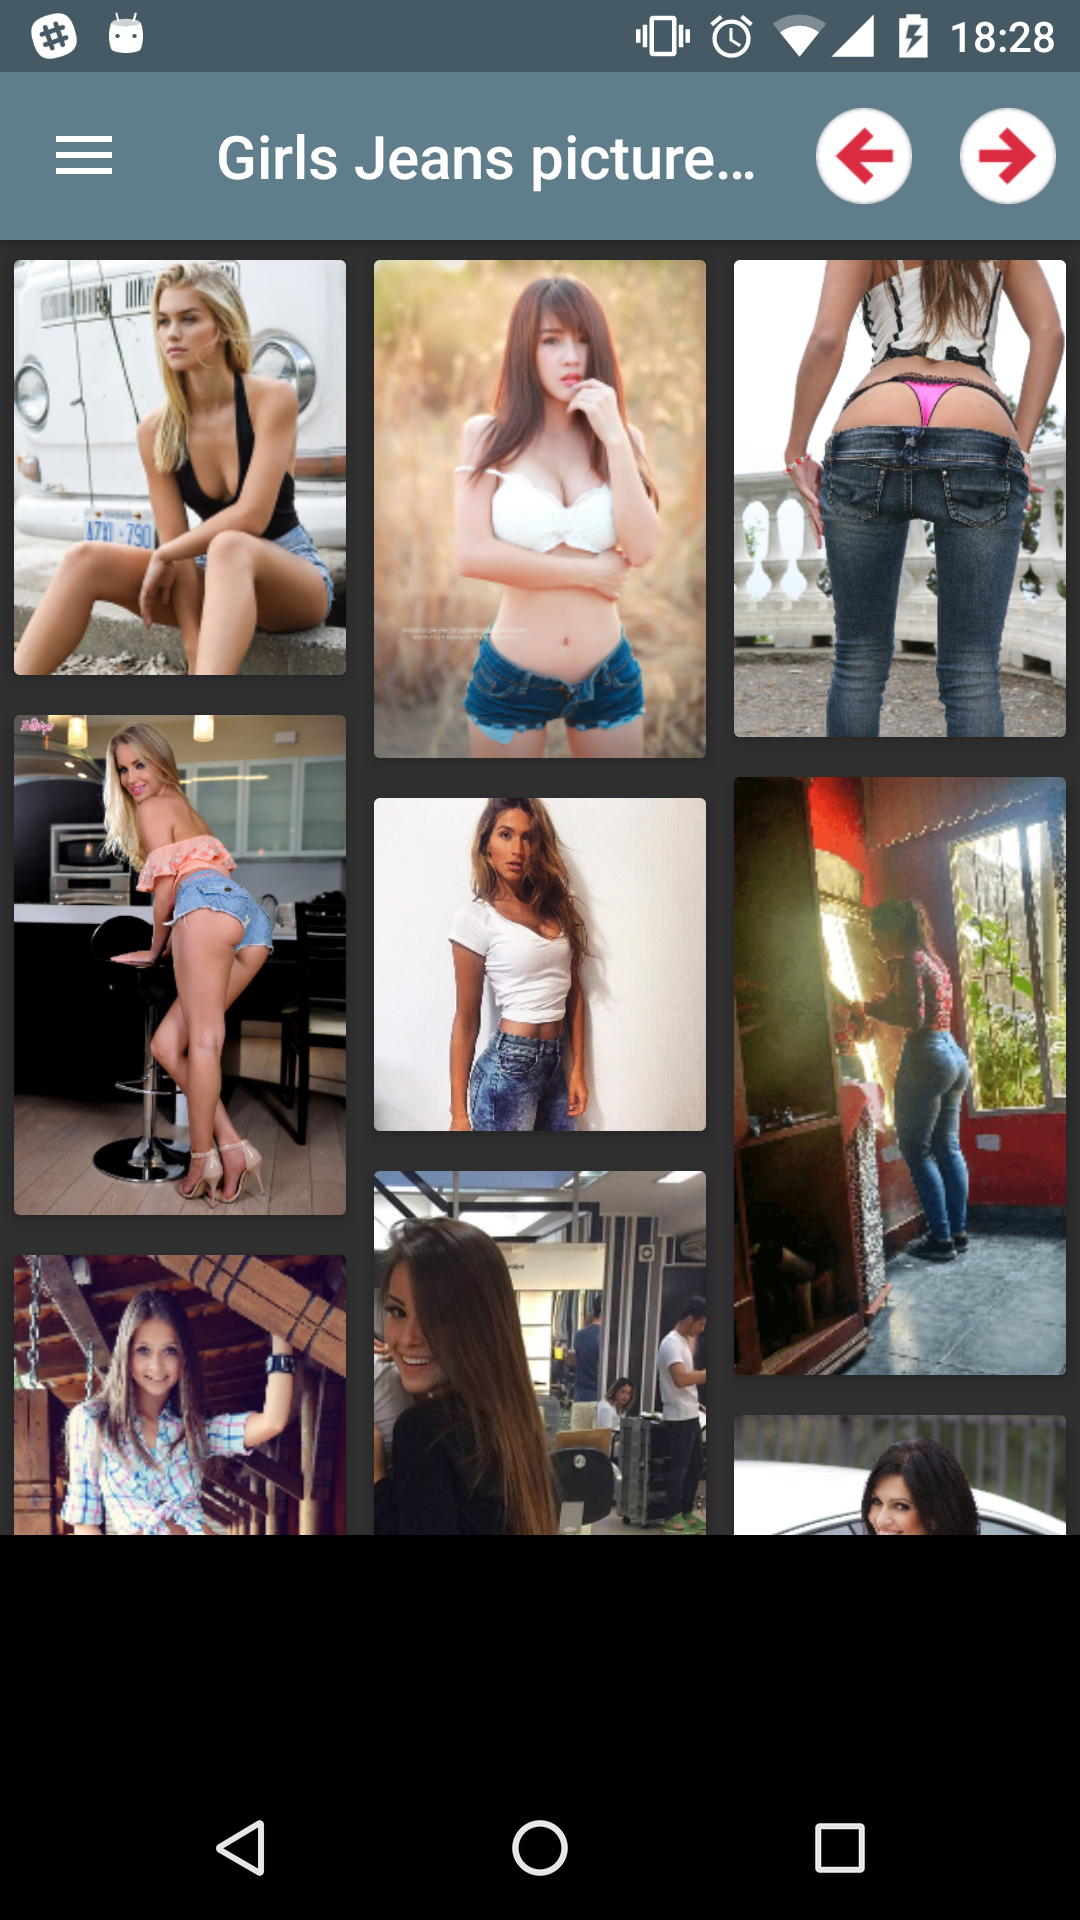 Girls in Jeans photos hentie,henti,galleries,jeans,porn,app,apk,girls,photo,photos,adult,asses,panties,wallpaper,pictures,puzzles,dresses,pics,hot,images,amateur,pic,erotic,sexy,lisa,pornstars,shemales,hentai,mod,and,top